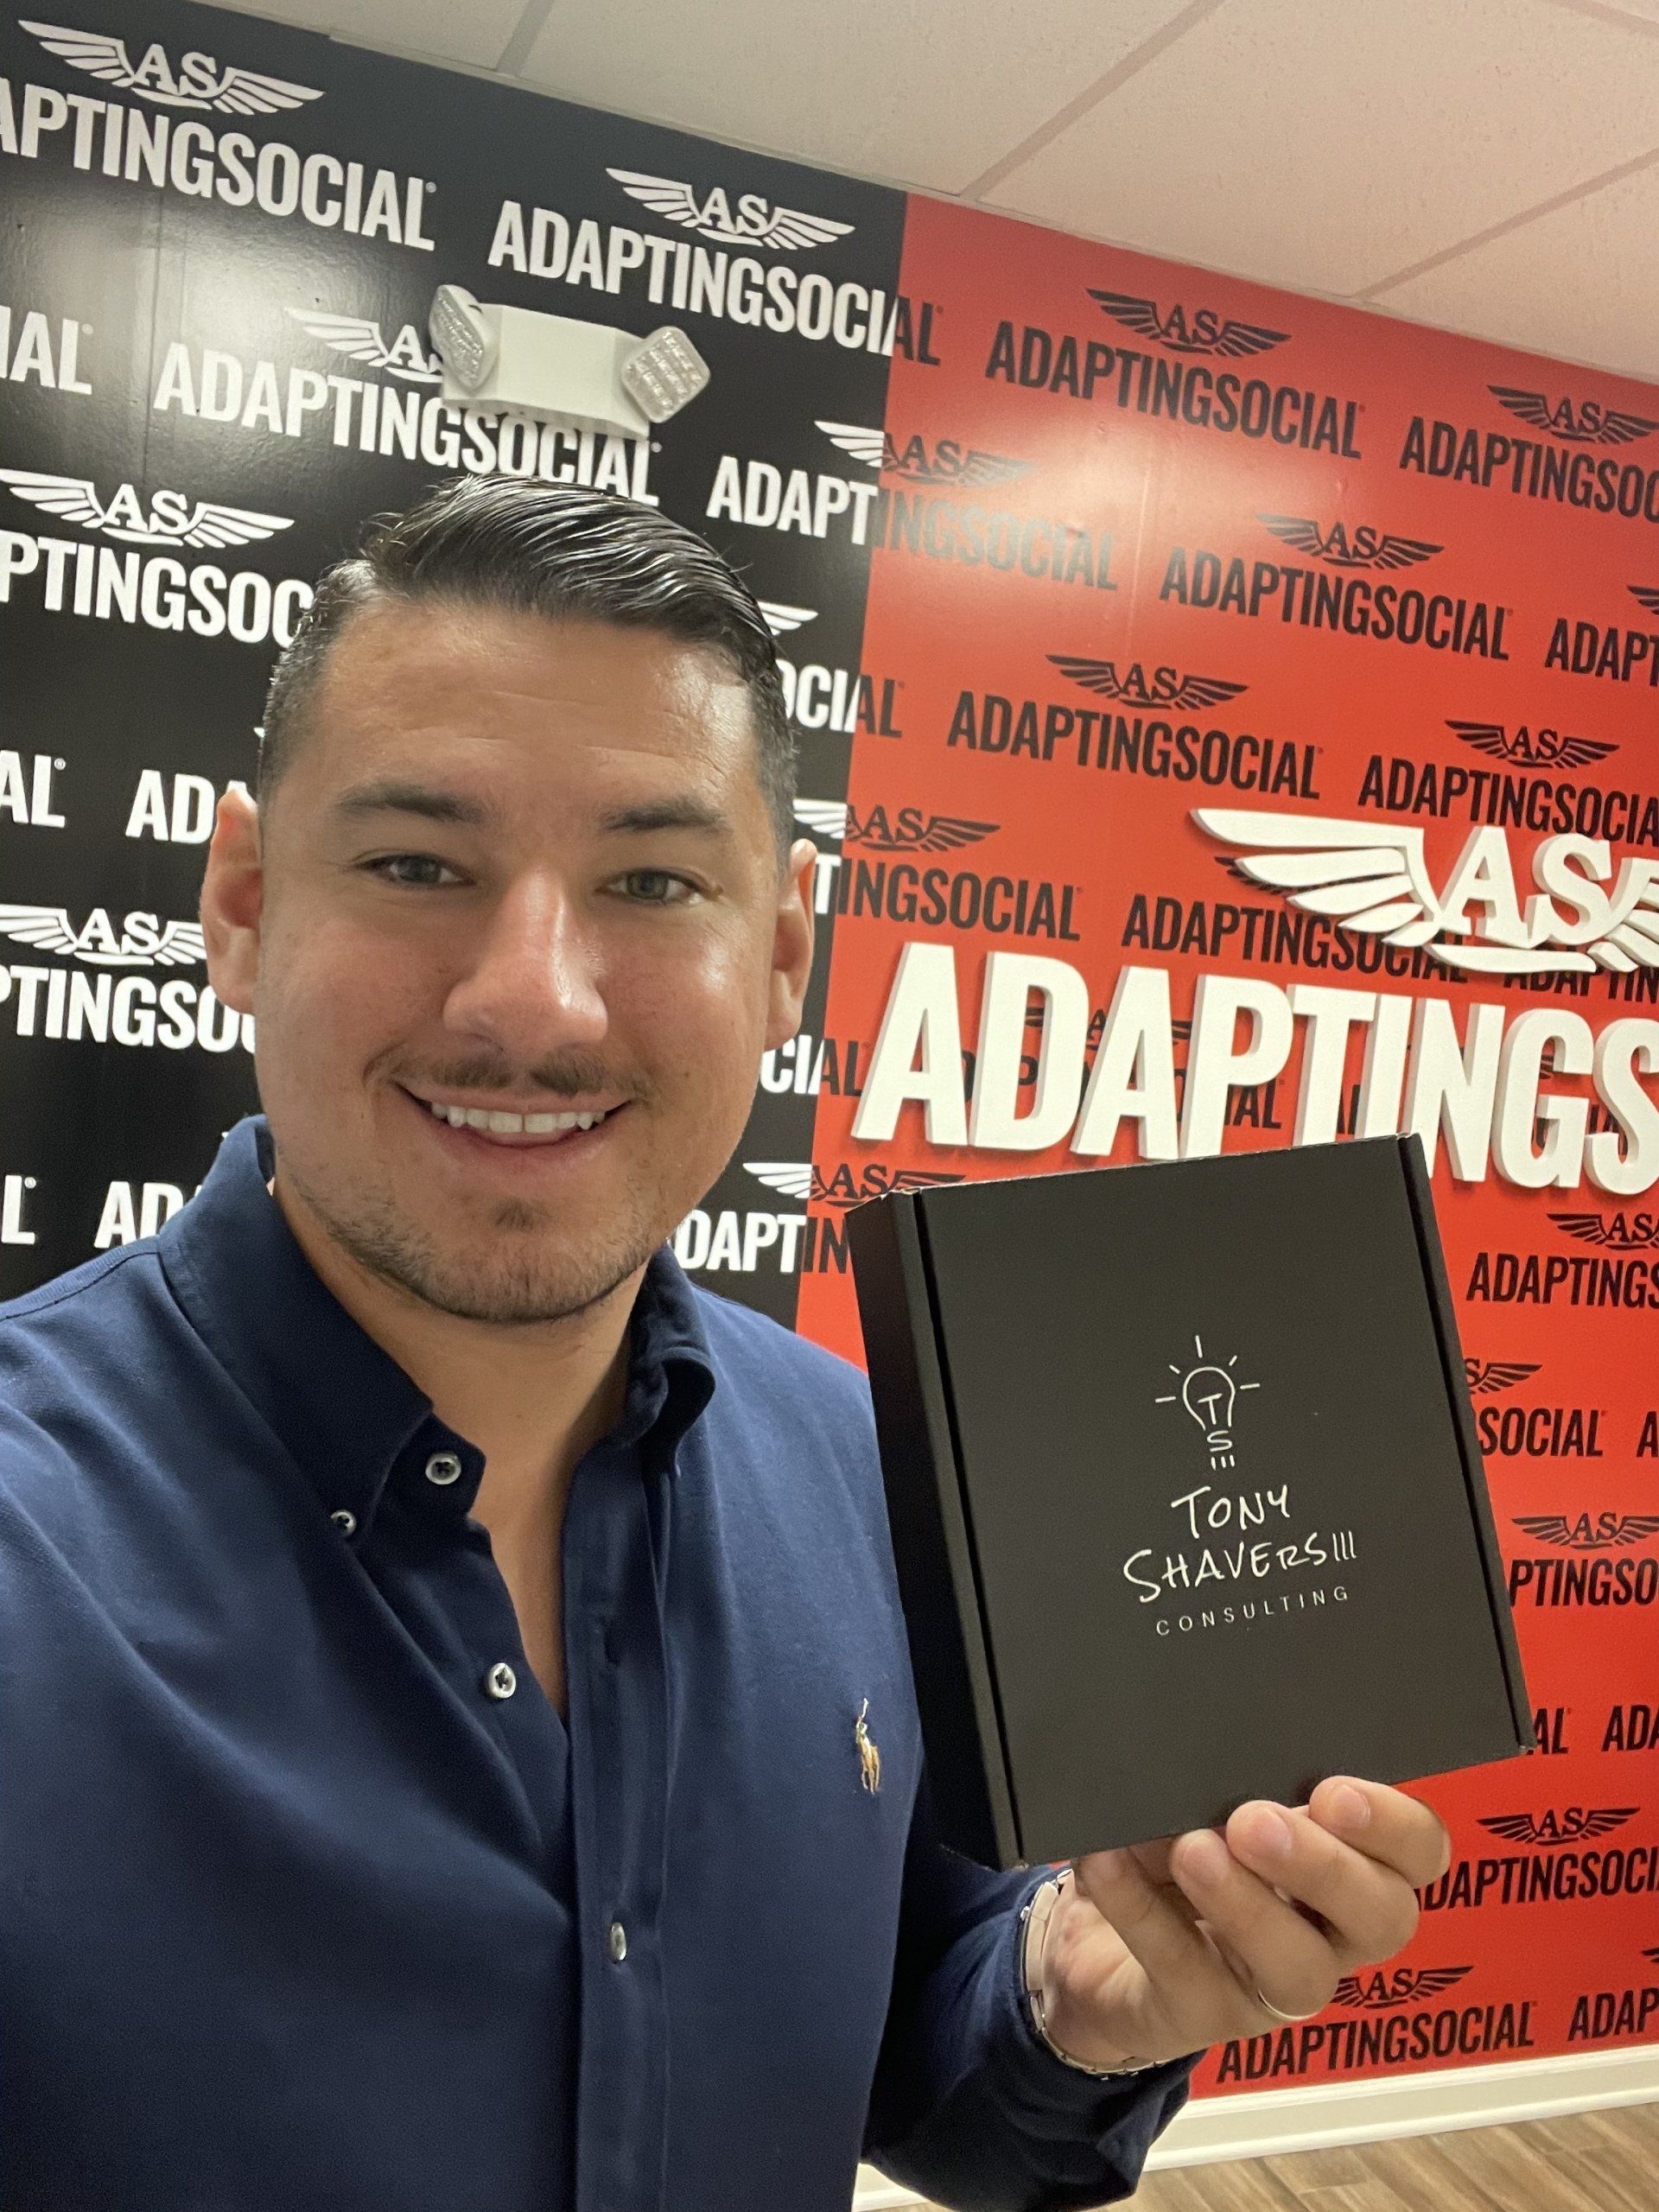 A triumphant Latino social marketer smiles while holding his new Press Reset affirmation card deck.